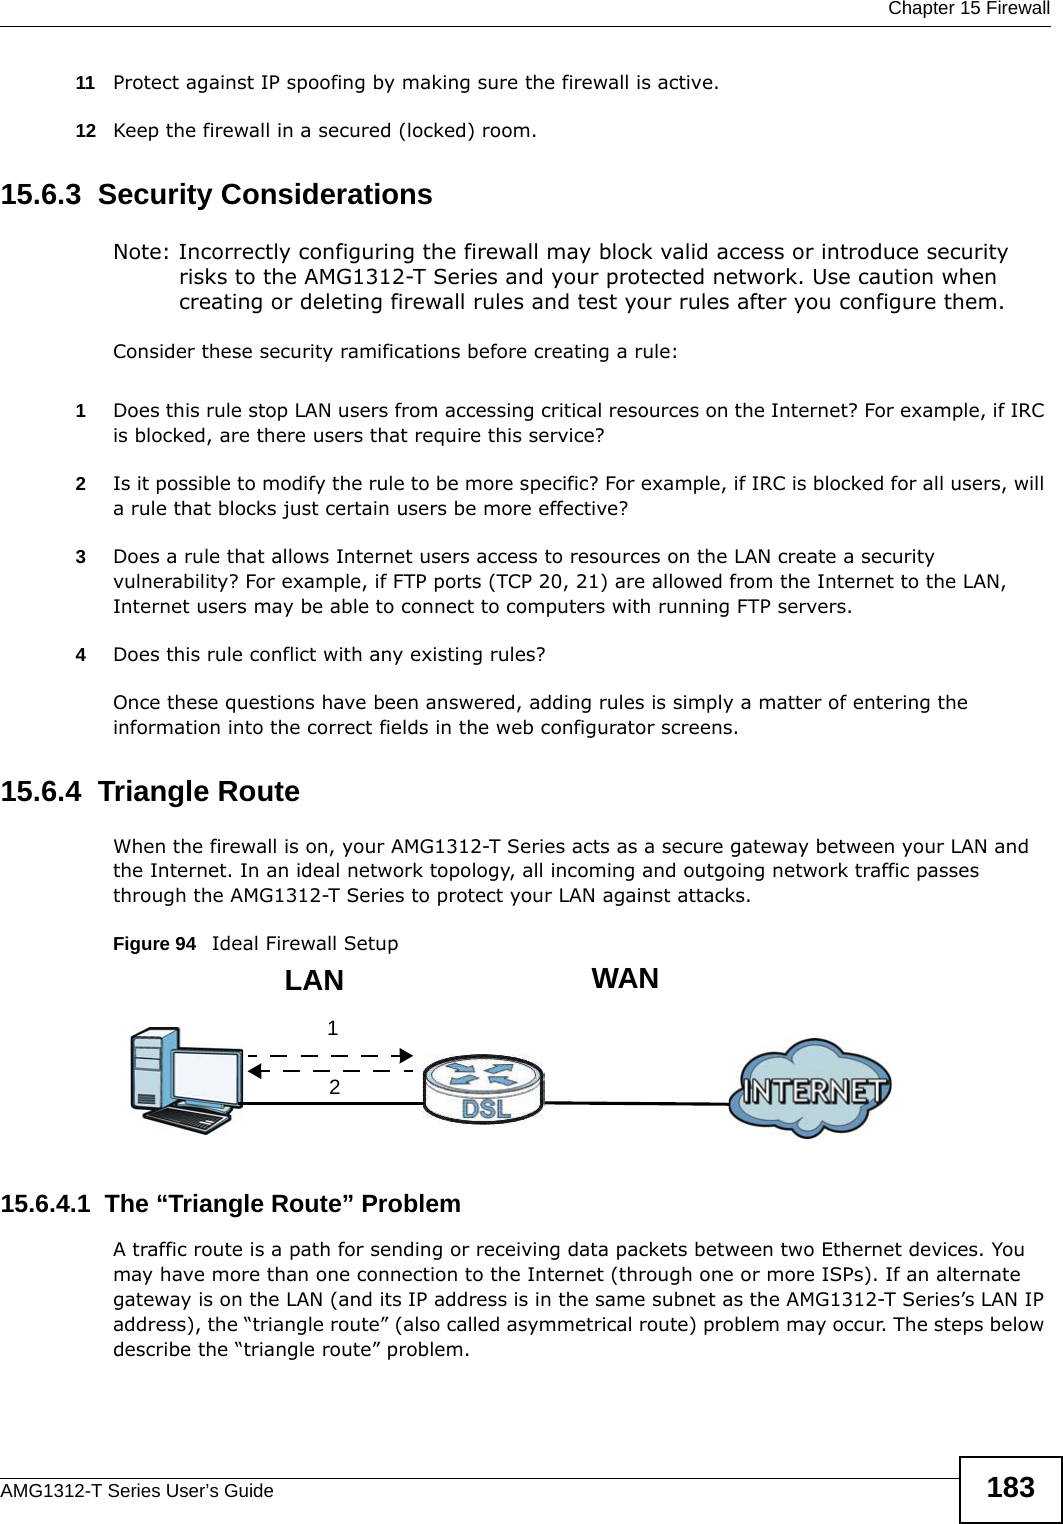  Chapter 15 FirewallAMG1312-T Series User’s Guide 18311 Protect against IP spoofing by making sure the firewall is active.12 Keep the firewall in a secured (locked) room.15.6.3  Security ConsiderationsNote: Incorrectly configuring the firewall may block valid access or introduce security risks to the AMG1312-T Series and your protected network. Use caution when creating or deleting firewall rules and test your rules after you configure them.Consider these security ramifications before creating a rule:1Does this rule stop LAN users from accessing critical resources on the Internet? For example, if IRC is blocked, are there users that require this service?2Is it possible to modify the rule to be more specific? For example, if IRC is blocked for all users, will a rule that blocks just certain users be more effective?3Does a rule that allows Internet users access to resources on the LAN create a security vulnerability? For example, if FTP ports (TCP 20, 21) are allowed from the Internet to the LAN, Internet users may be able to connect to computers with running FTP servers.4Does this rule conflict with any existing rules?Once these questions have been answered, adding rules is simply a matter of entering the information into the correct fields in the web configurator screens.15.6.4  Triangle RouteWhen the firewall is on, your AMG1312-T Series acts as a secure gateway between your LAN and the Internet. In an ideal network topology, all incoming and outgoing network traffic passes through the AMG1312-T Series to protect your LAN against attacks.Figure 94   Ideal Firewall Setup15.6.4.1  The “Triangle Route” ProblemA traffic route is a path for sending or receiving data packets between two Ethernet devices. You may have more than one connection to the Internet (through one or more ISPs). If an alternate gateway is on the LAN (and its IP address is in the same subnet as the AMG1312-T Series’s LAN IP address), the “triangle route” (also called asymmetrical route) problem may occur. The steps below describe the “triangle route” problem. 12WANLAN